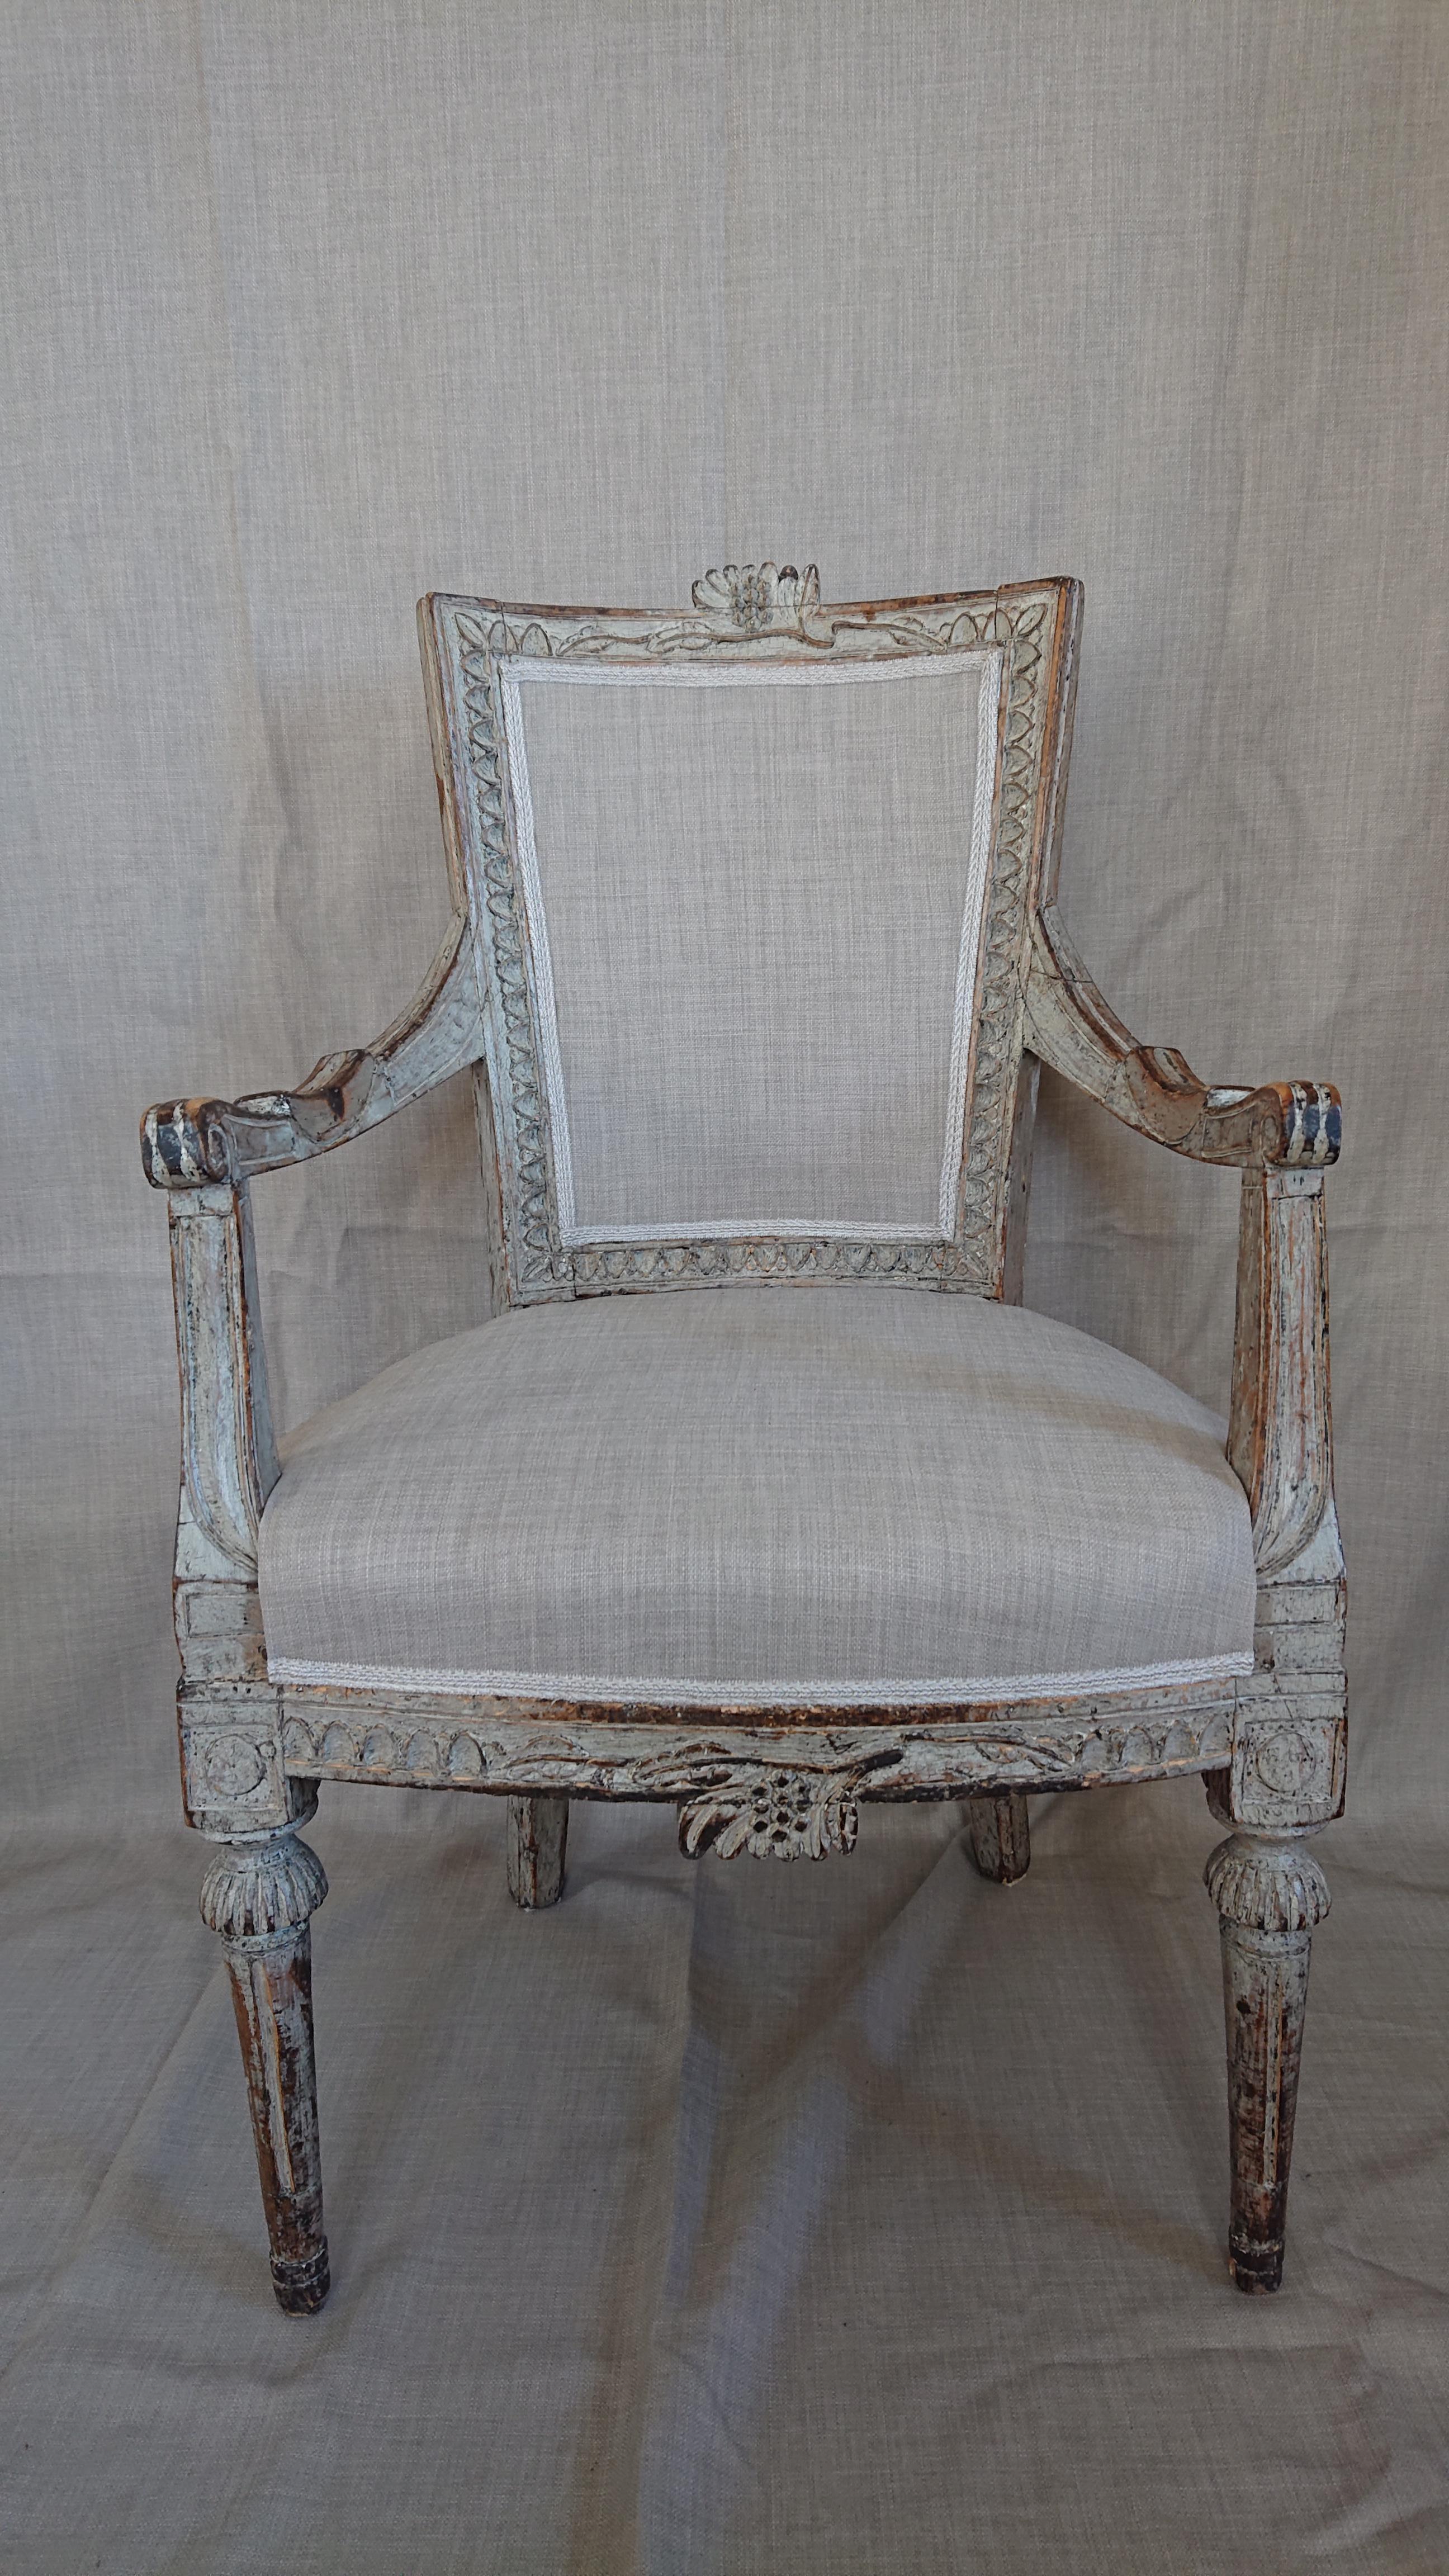 18th Century Swedish Gustavian armchair from Lindome, Southern Sweden.
A beautiful well carved chair with nice details & in form of flowers & leaves .
Handscraped to its well preserved original color.
The chair is upholstered in a classic